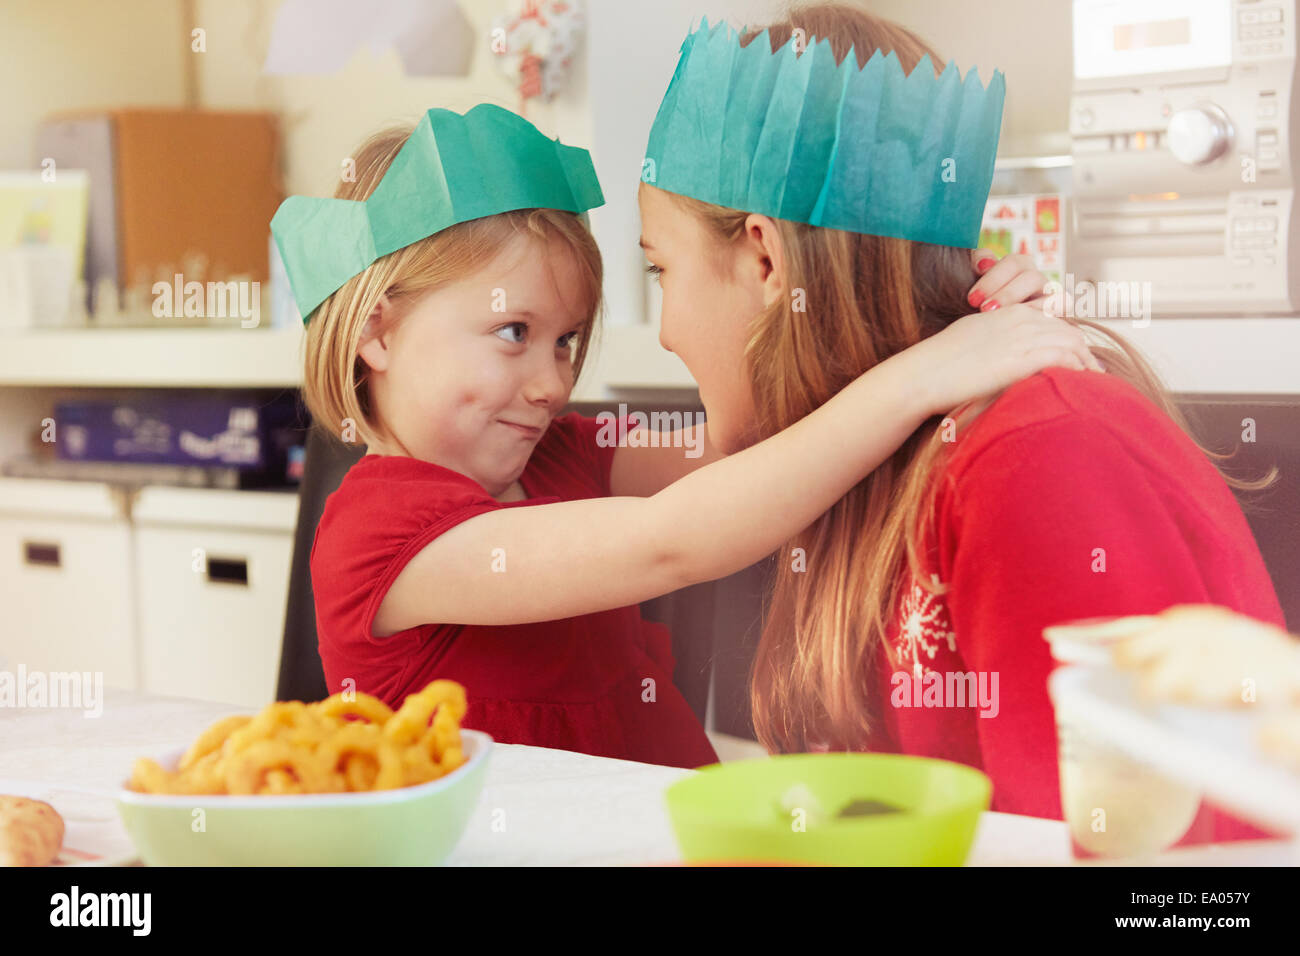 Sisters in paper crowns, hugging Stock Photo